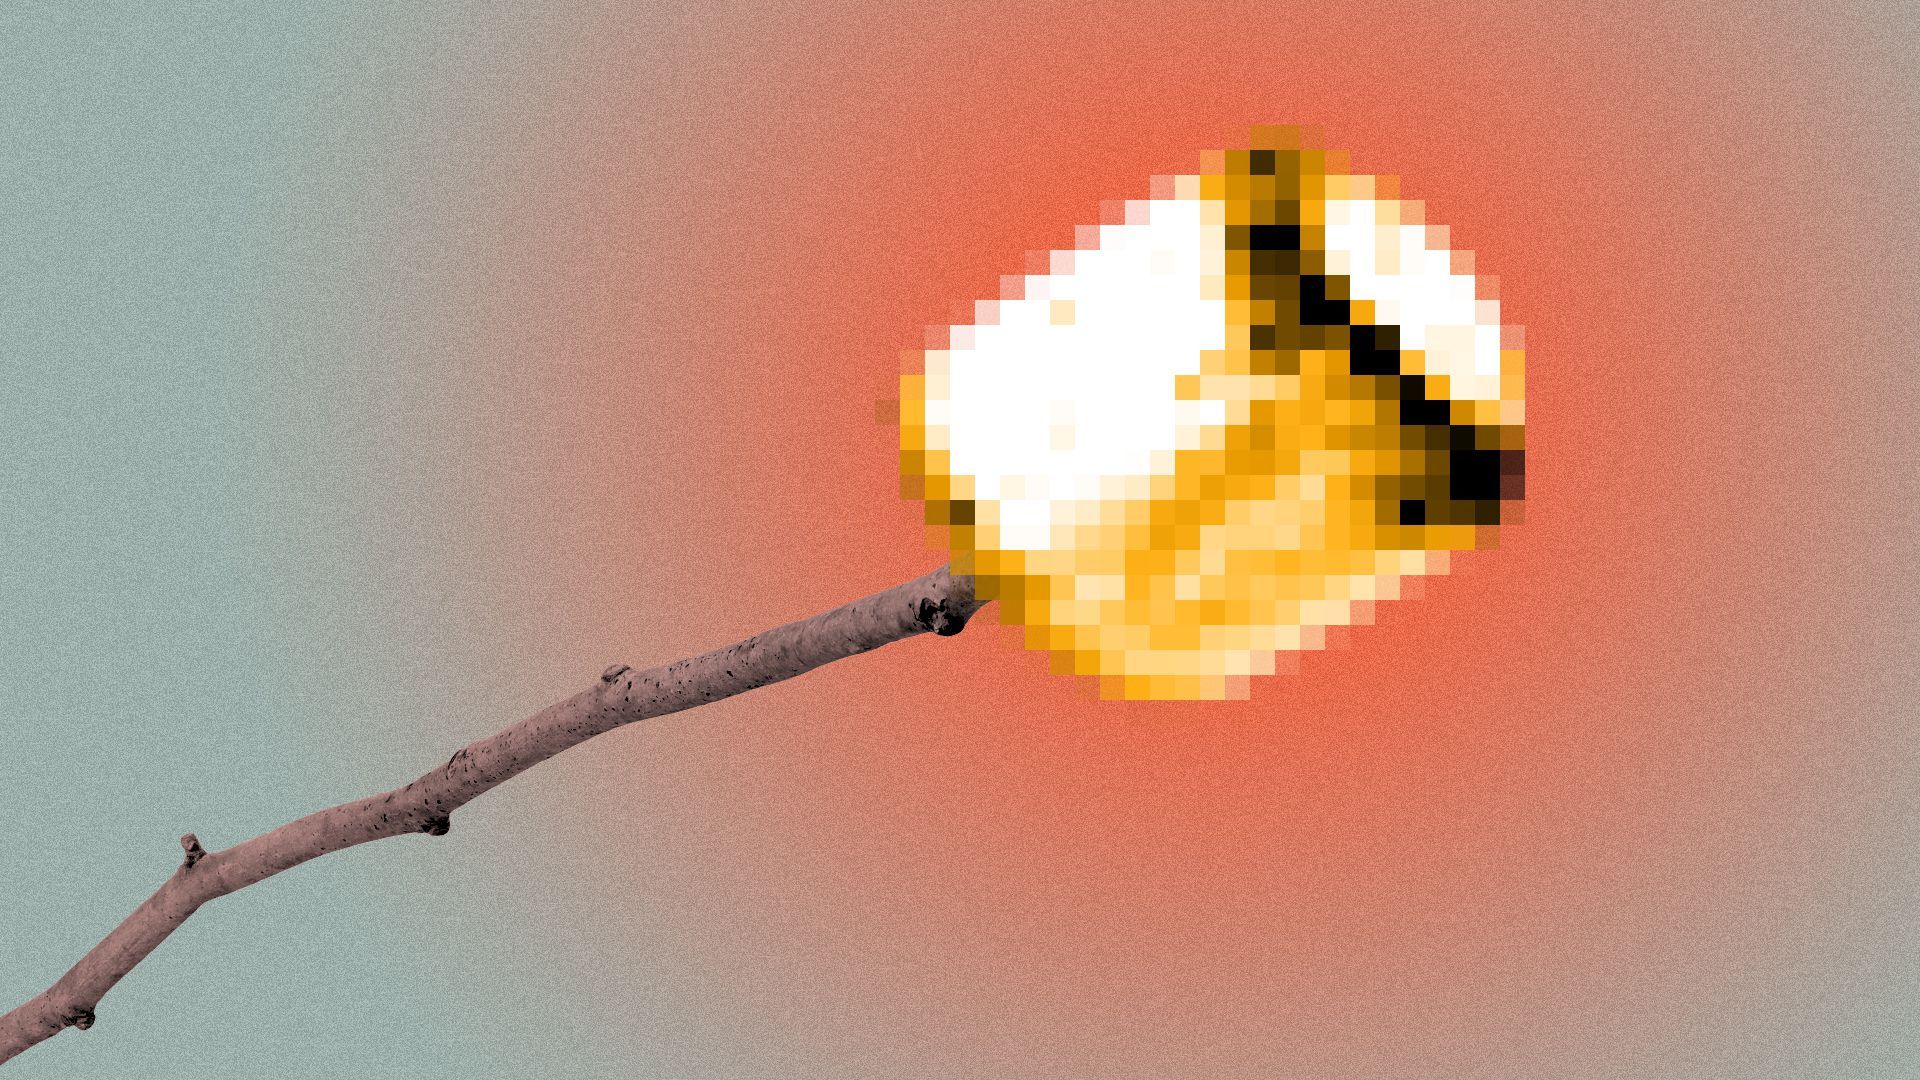 Illustration of a pixelated marshmallow roasting on a stick.